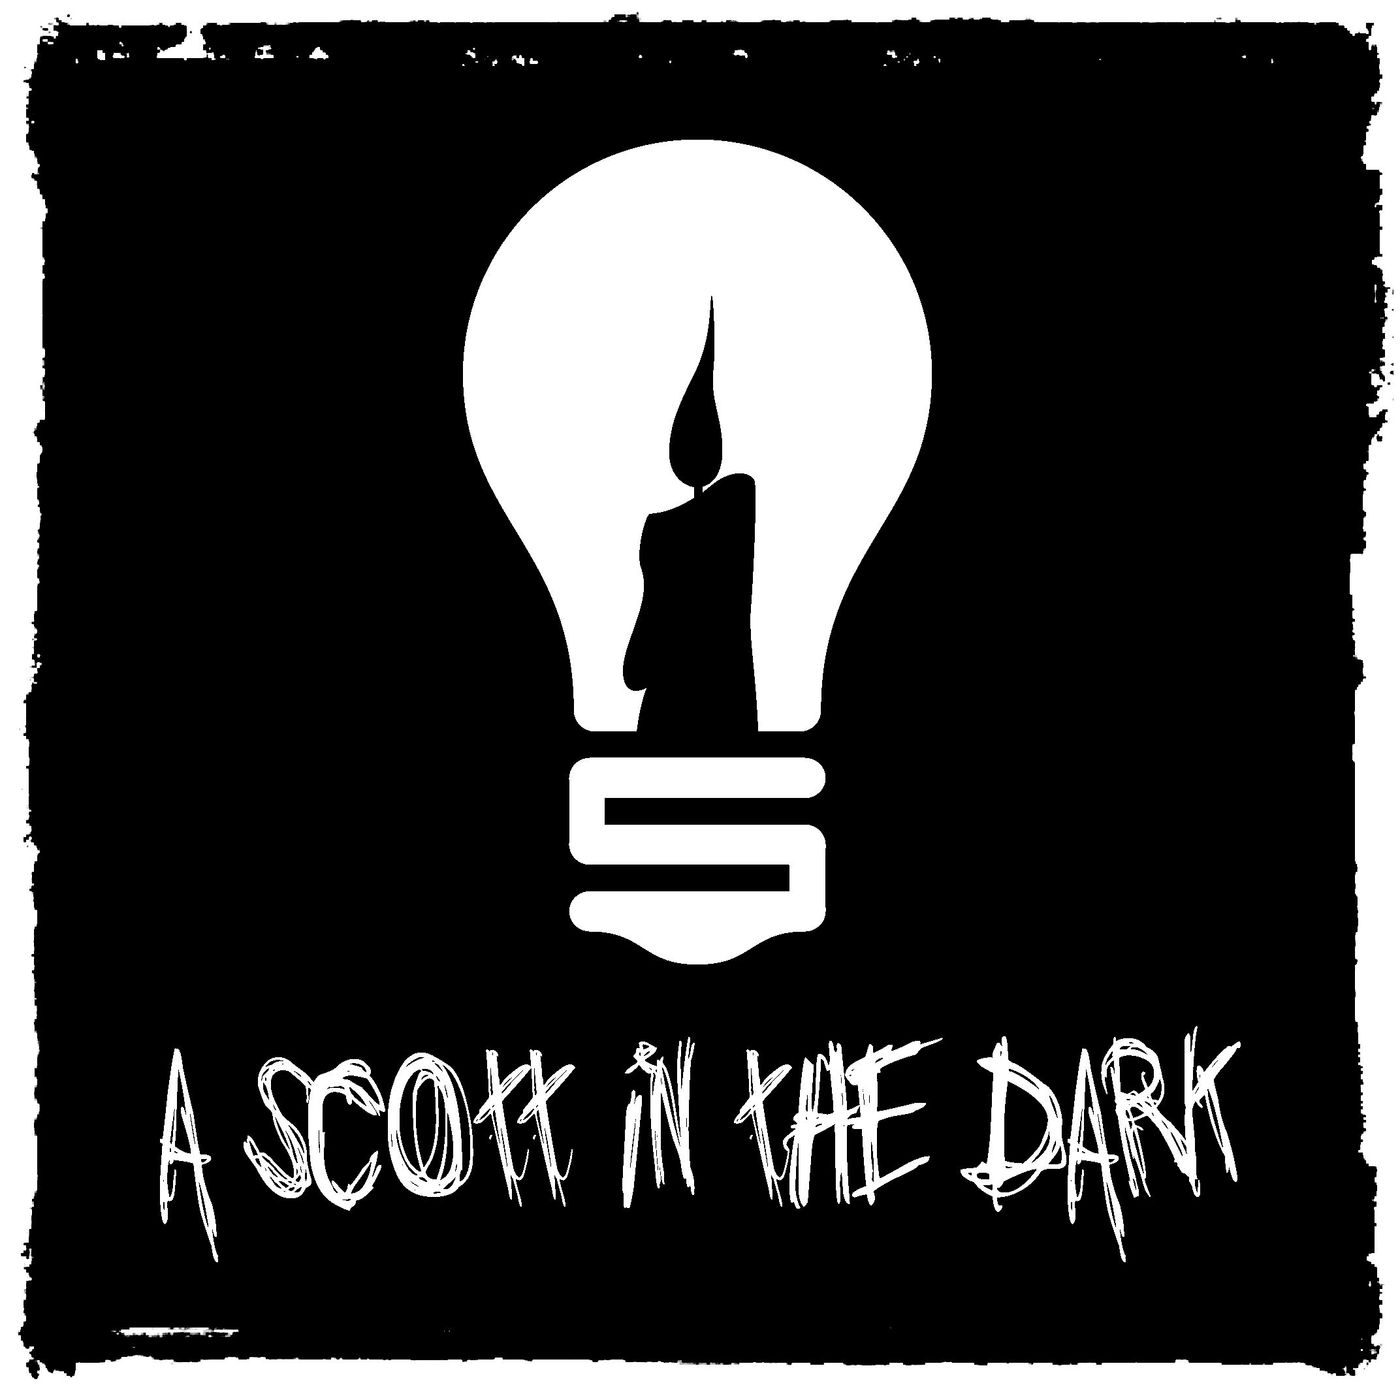 [A Scott in the Dark] Episode 13: Learning From Ren Rats and Fairie Folk